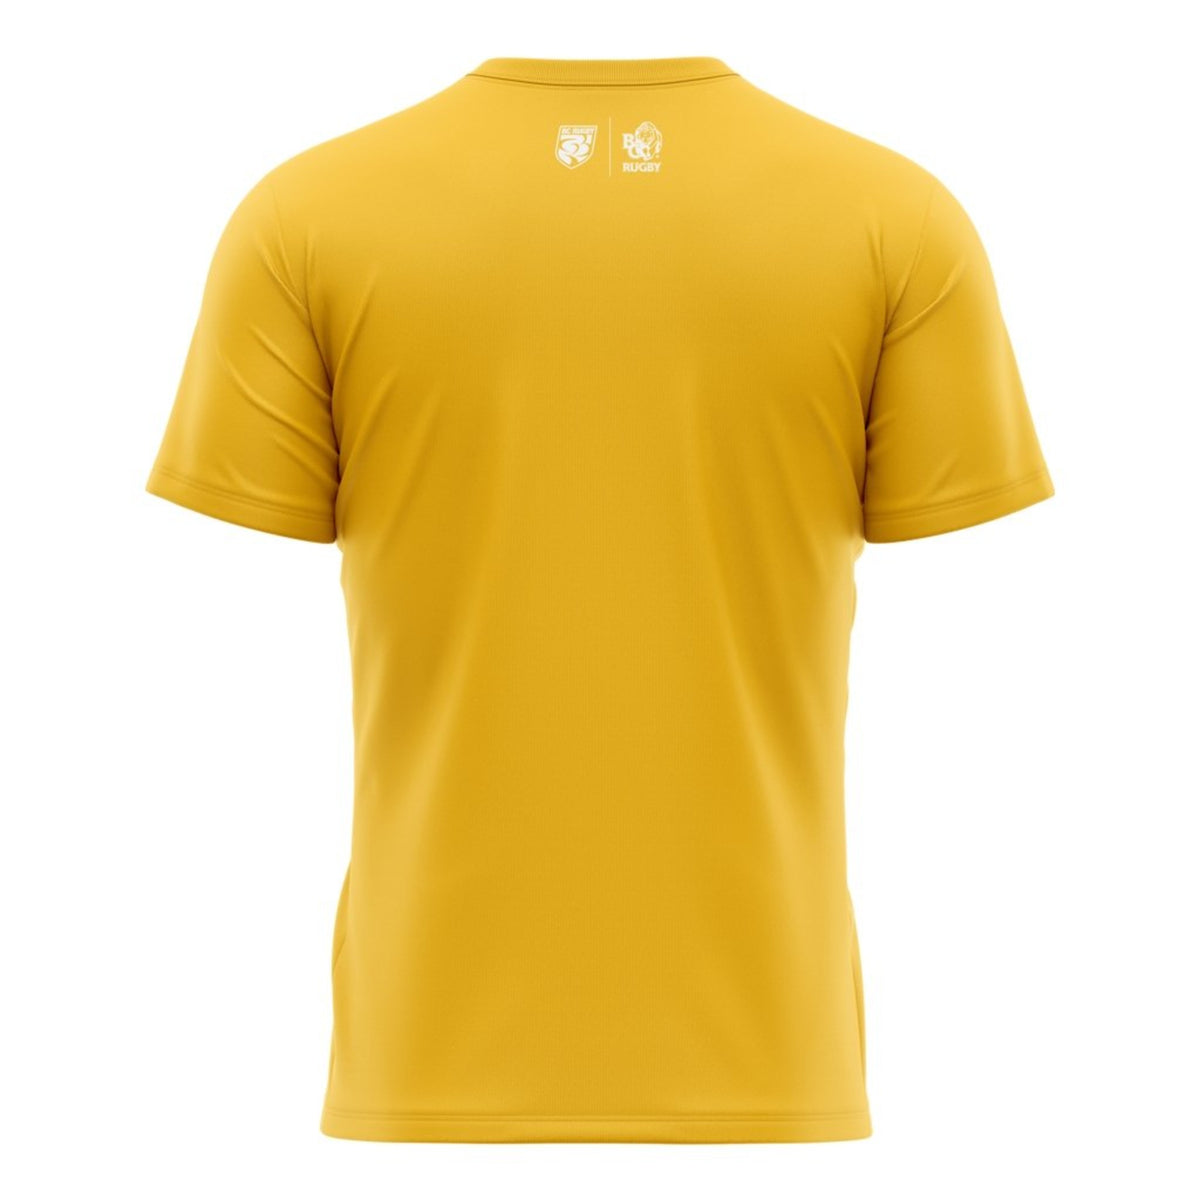 BC Rugby 2021 &quot;Bears&quot; Tee - Youth White/Gold - www.therugbyshop.com www.therugbyshop.com XIX Brands TEES BC Rugby 2021 &quot;Bears&quot; Tee - Youth White/Gold